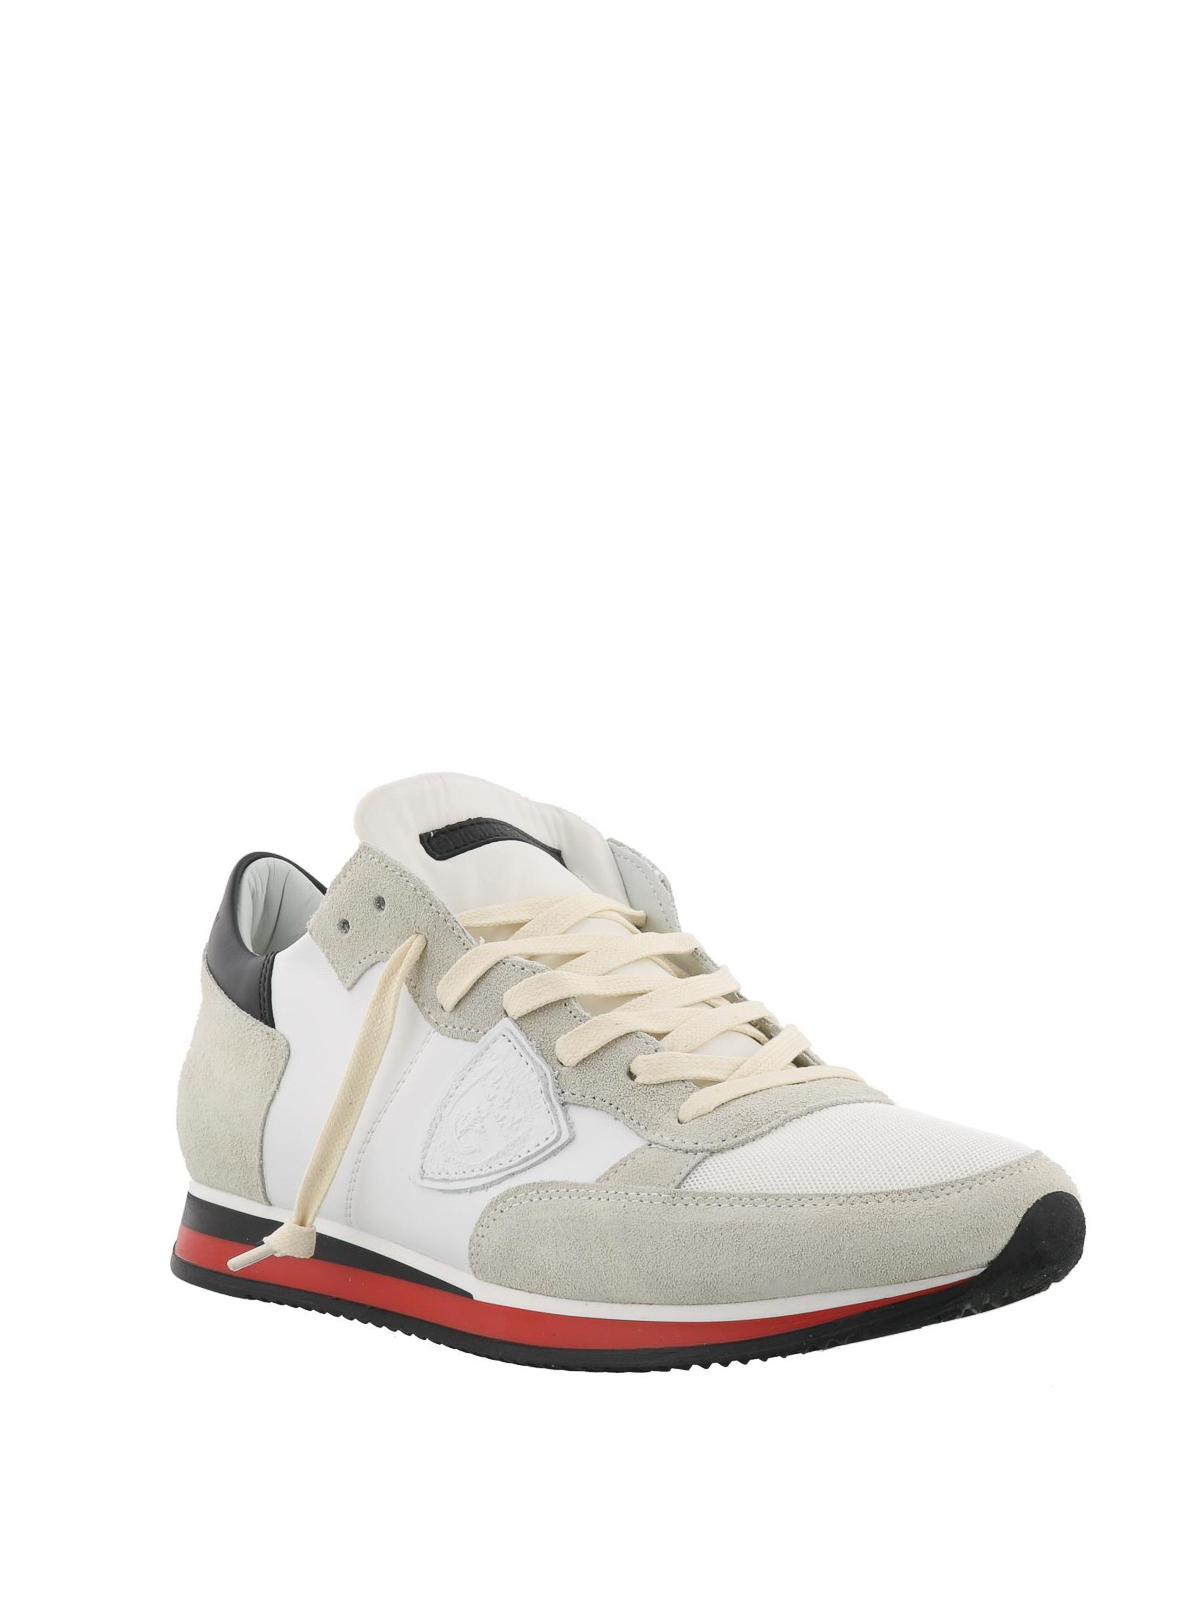 Trainers Philippe Model - Tropez white and black sneakers - TRLUWZ61